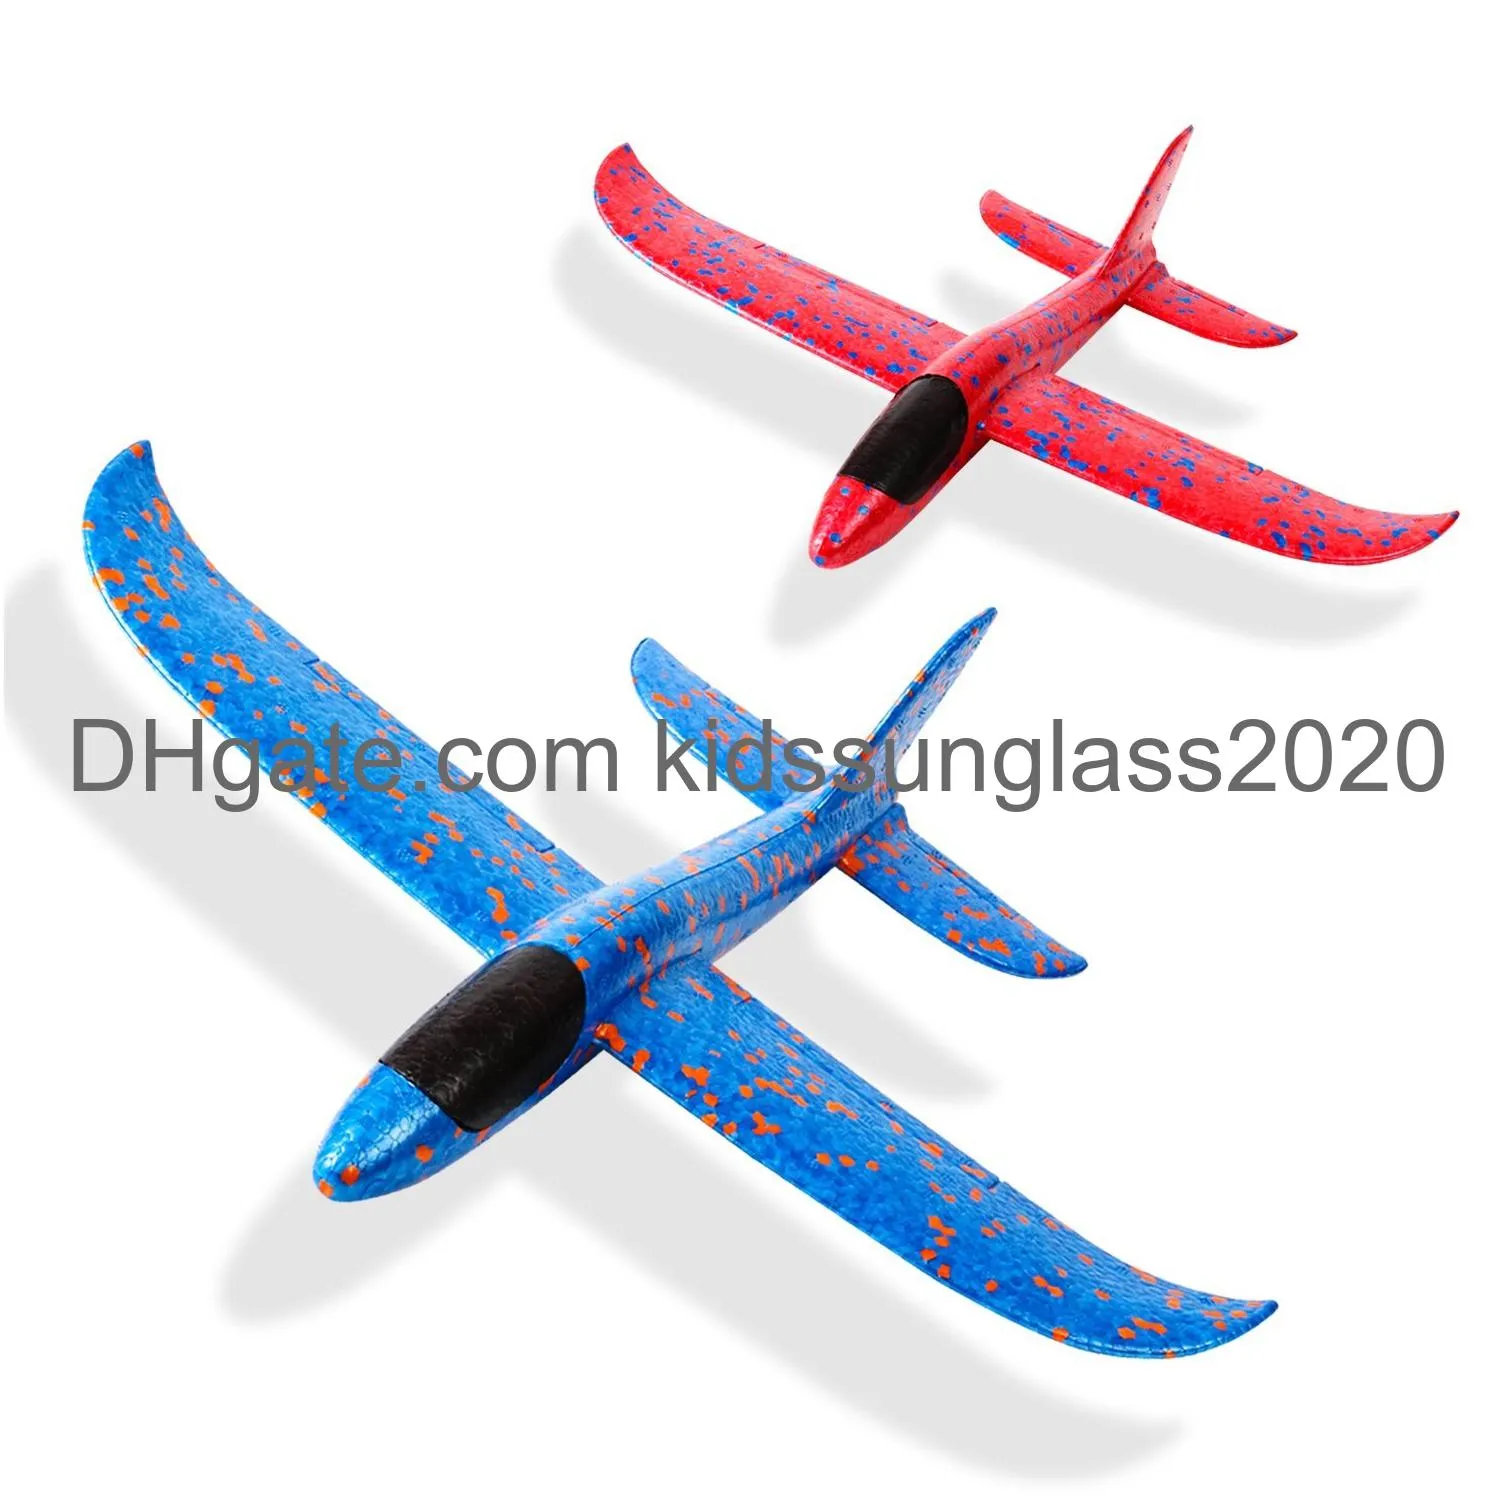 kizh throwing foam airplane toys 13.5 inches flying glider inertia plane manual circling functions flying aircraft fun best outdoor fun for kids children boys girls